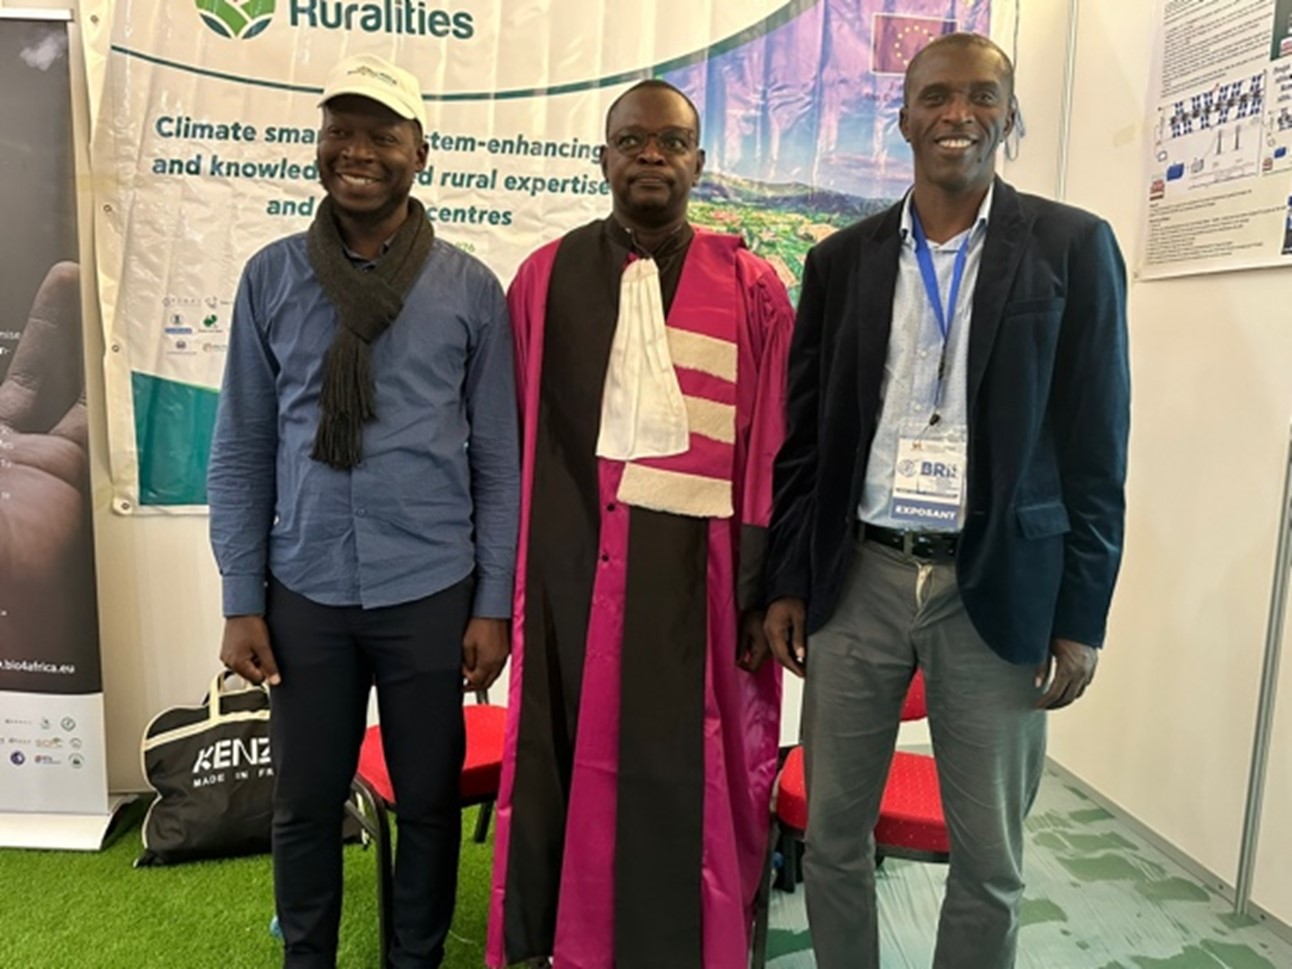 RURALITIES Project at the 1st Biennial Meeting on Research, Innovation and Industrialization in Africa